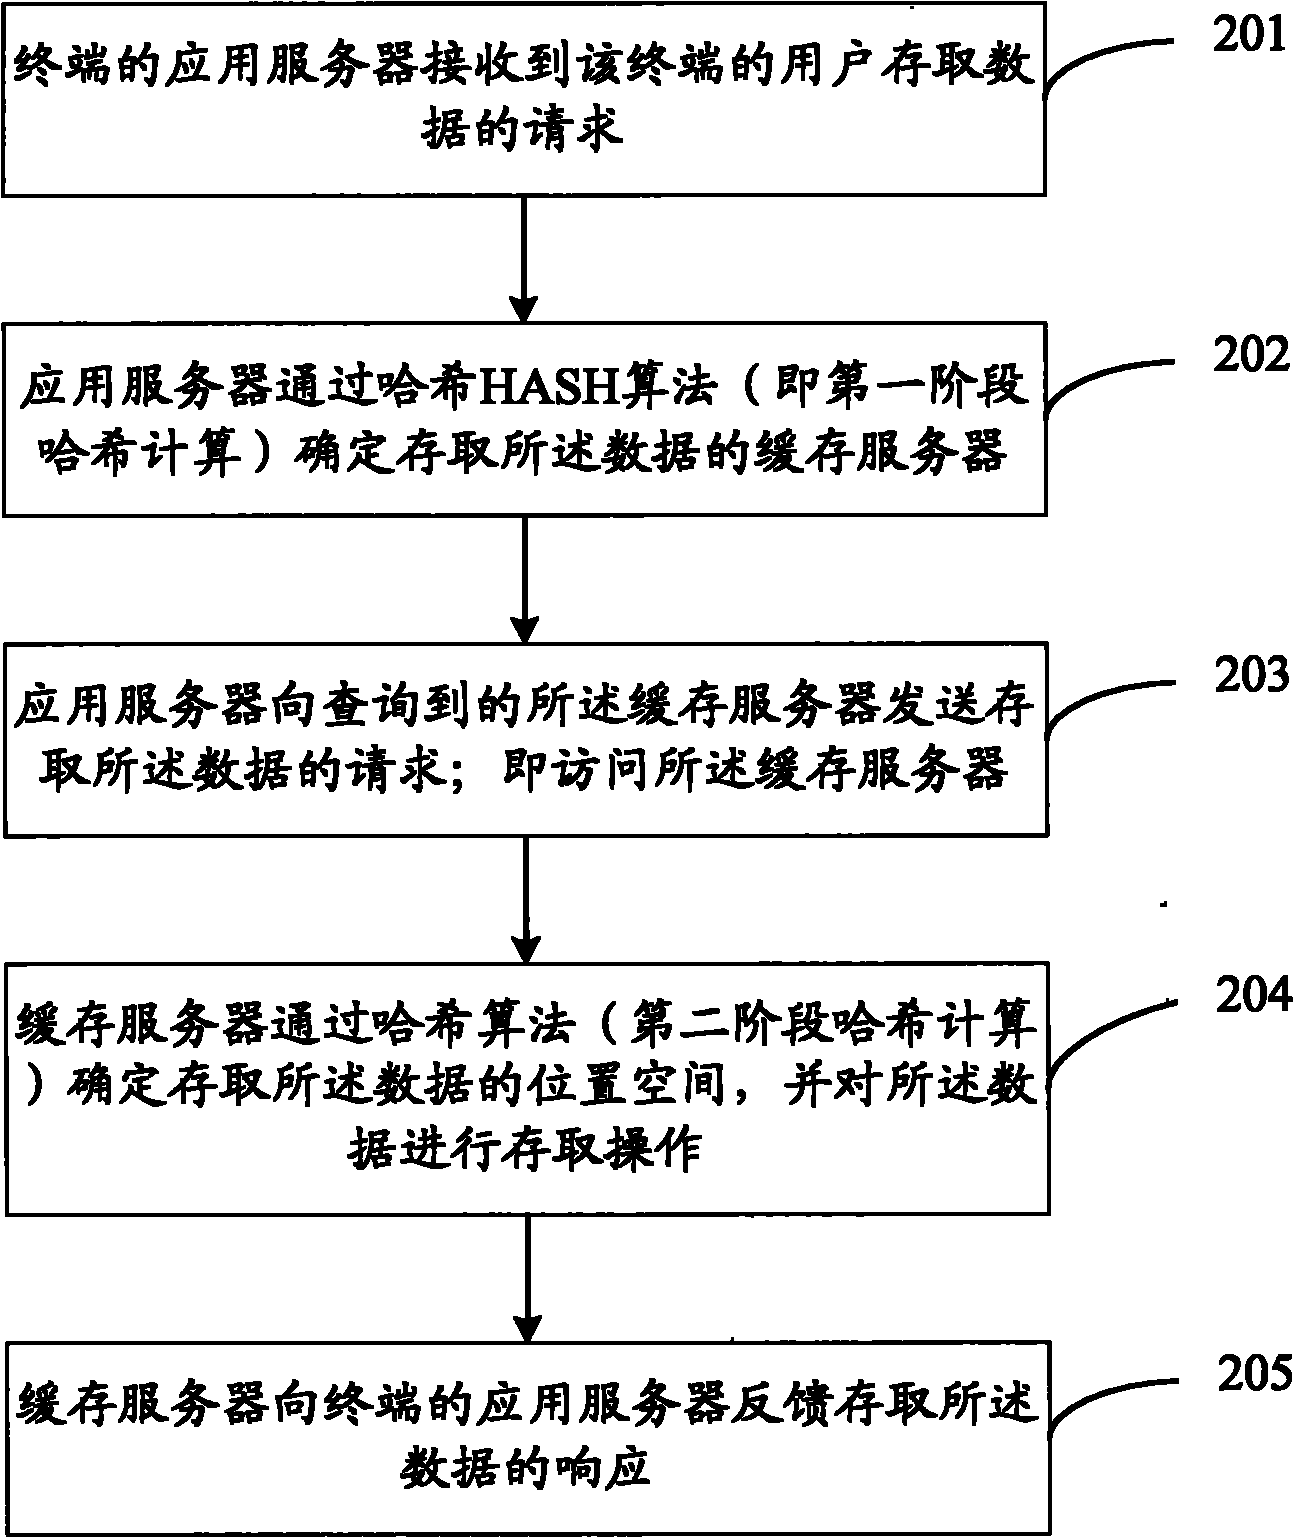 Distributed data access method, device and system